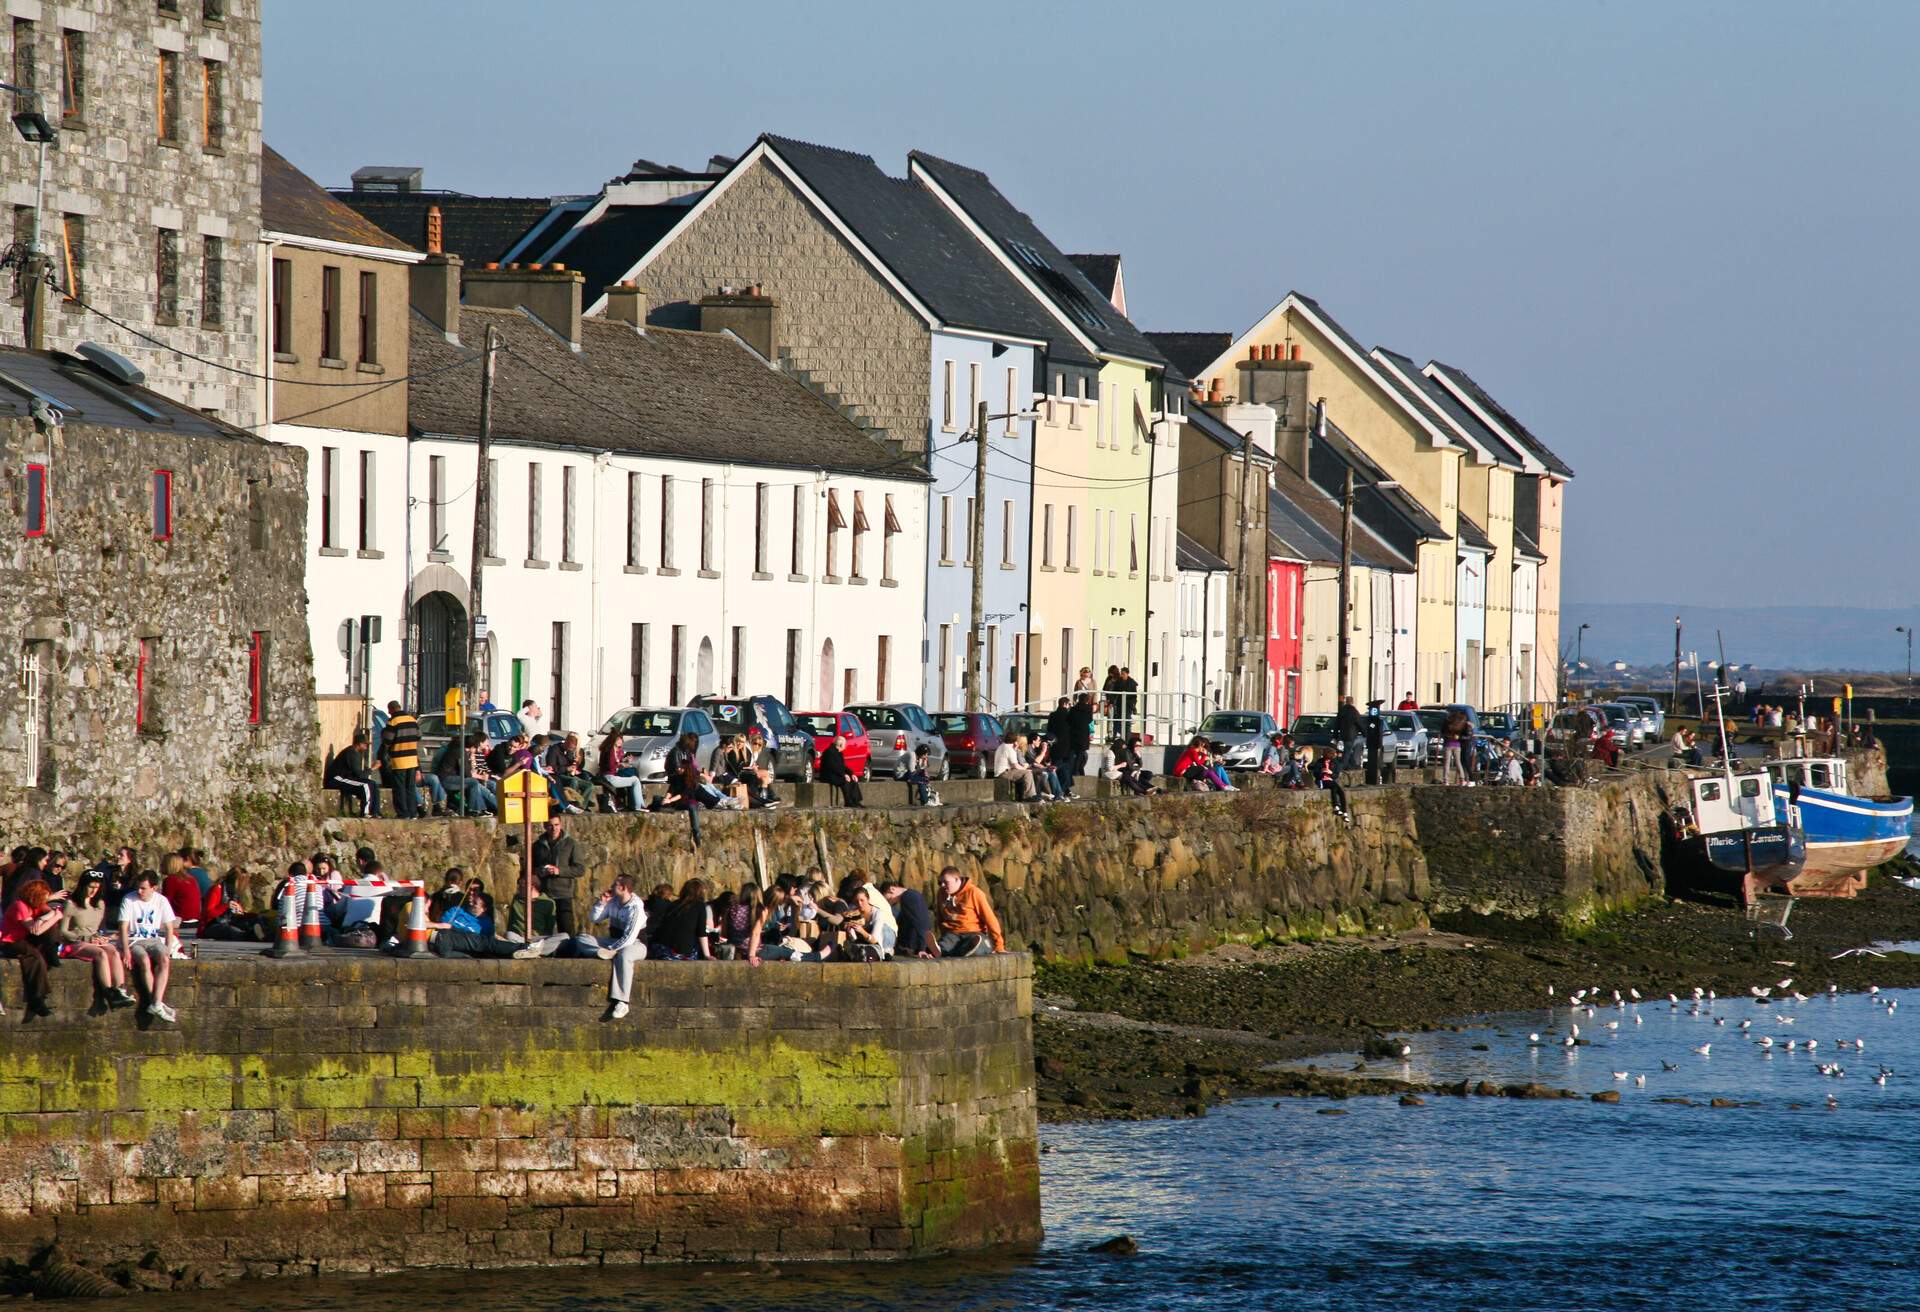 People enjoying the sunshine sitting on the quays at the Cladagh, Galway City, Ireland.